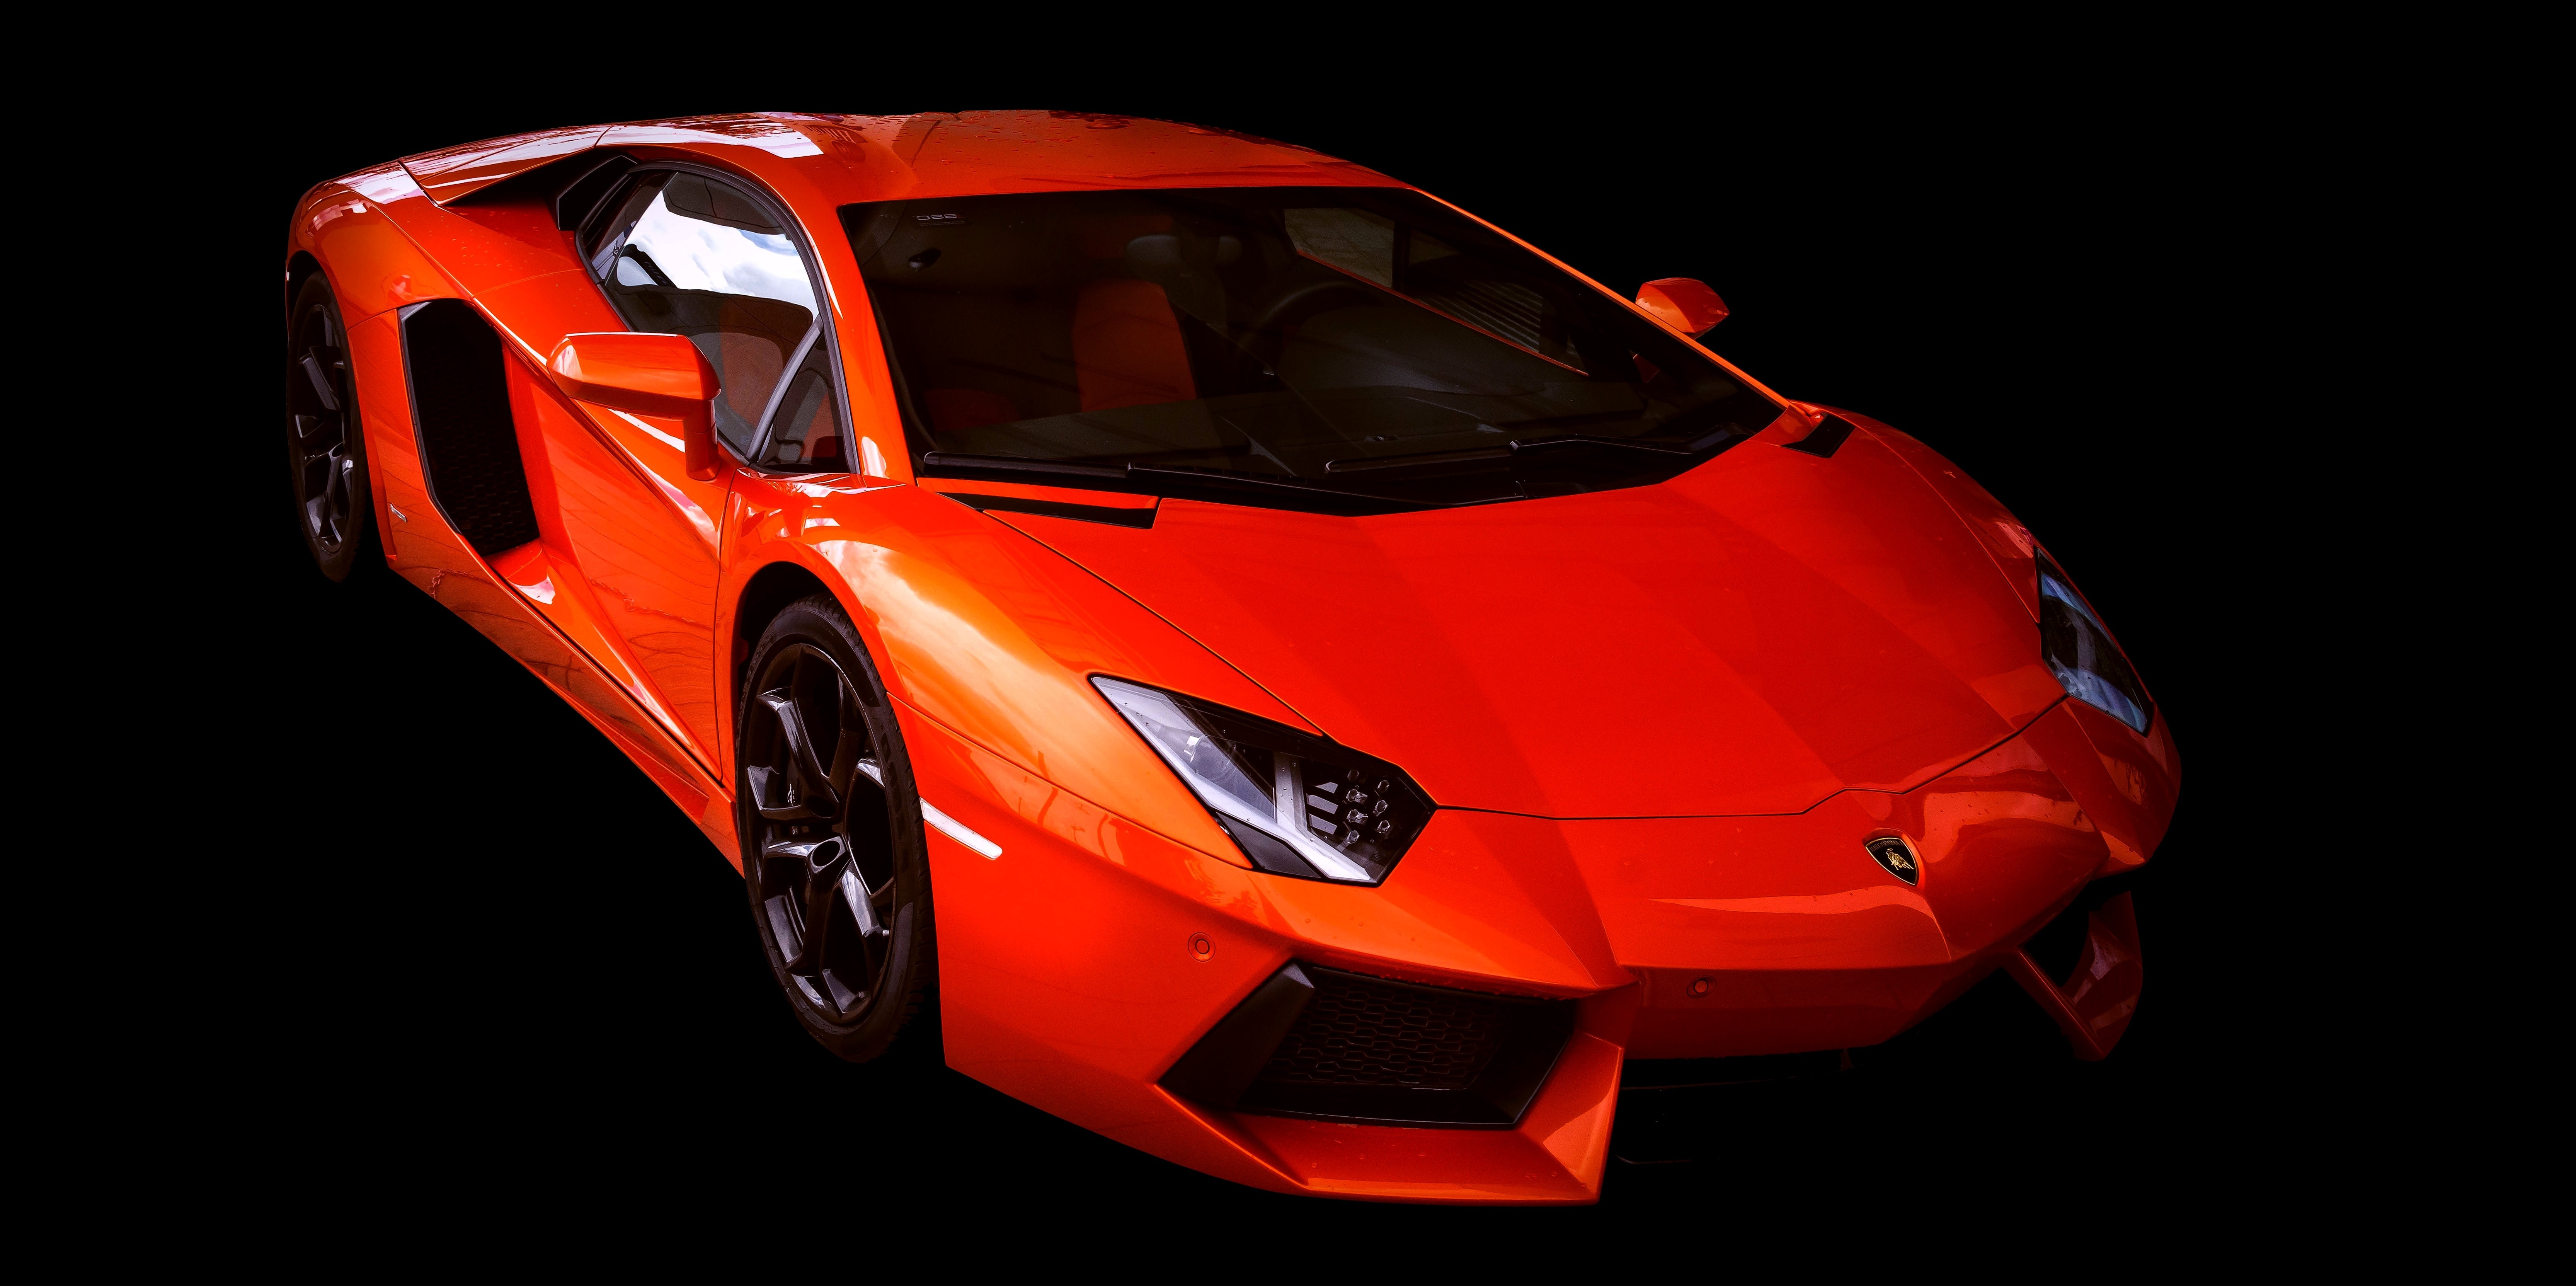 76448 download wallpaper sports, lamborghini, cars, red, car, sports car, lamborghini aventador screensavers and pictures for free